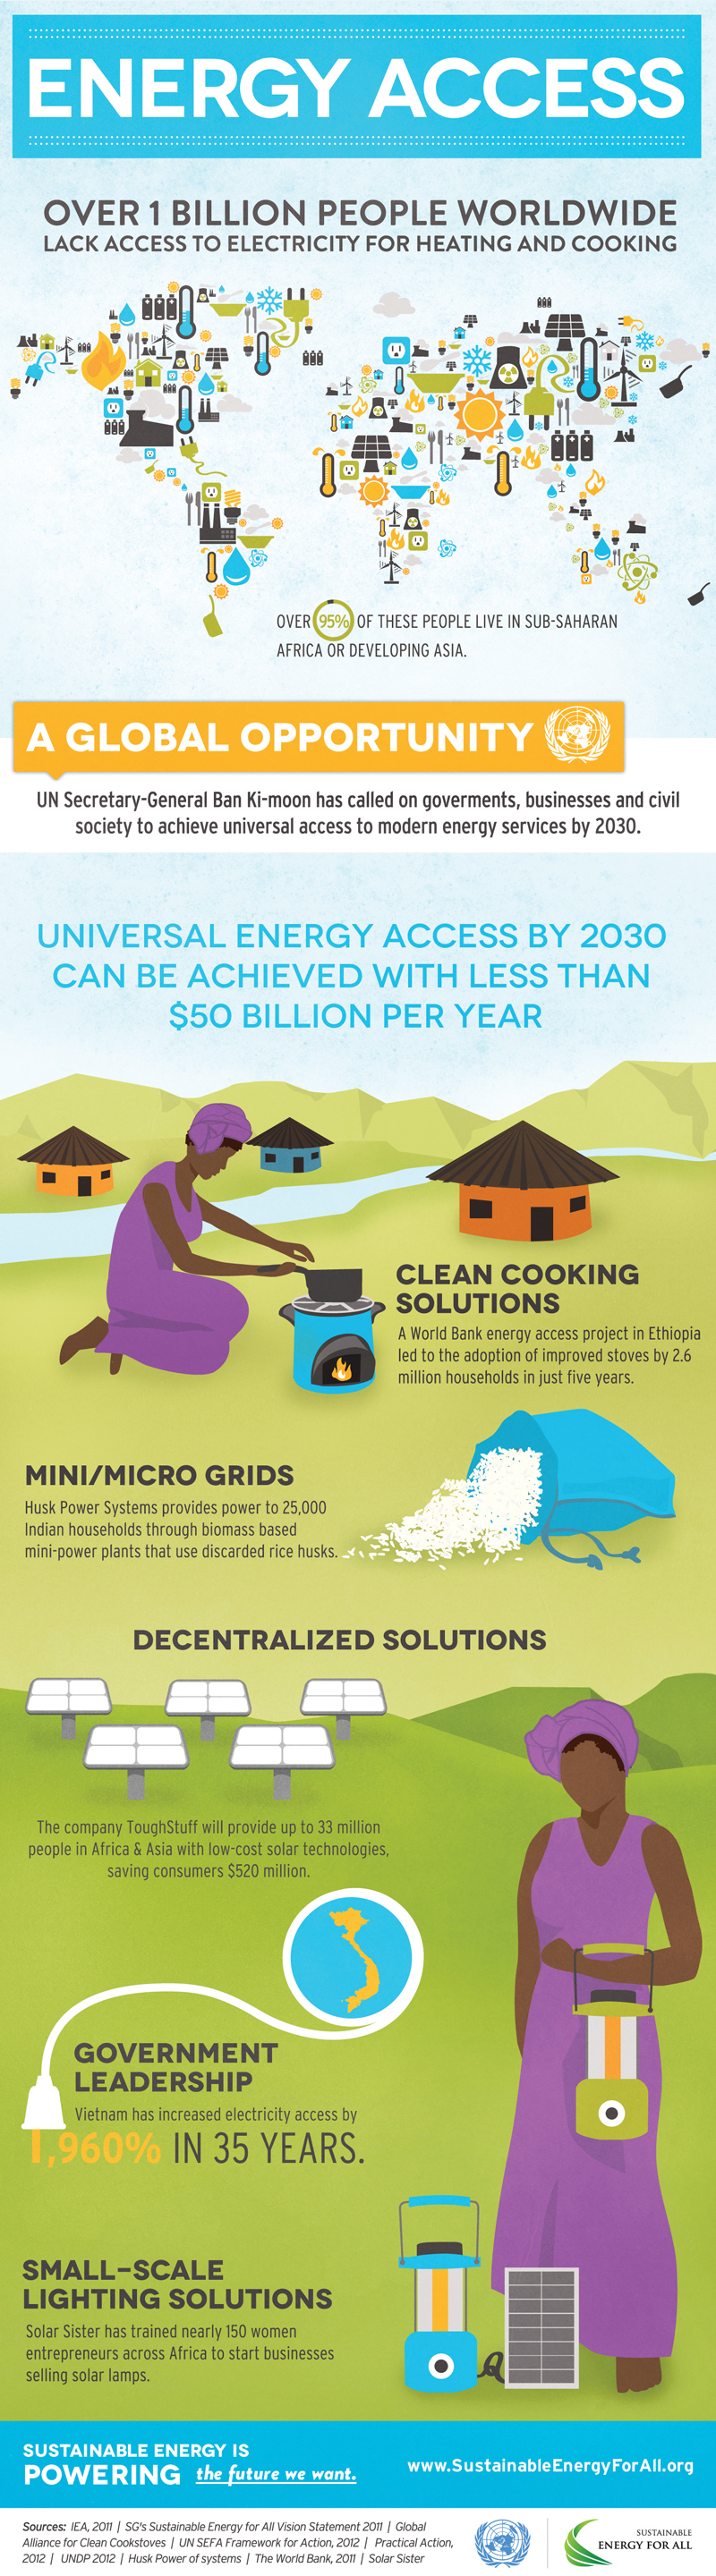 Sustainable Energy For All: Energy Access